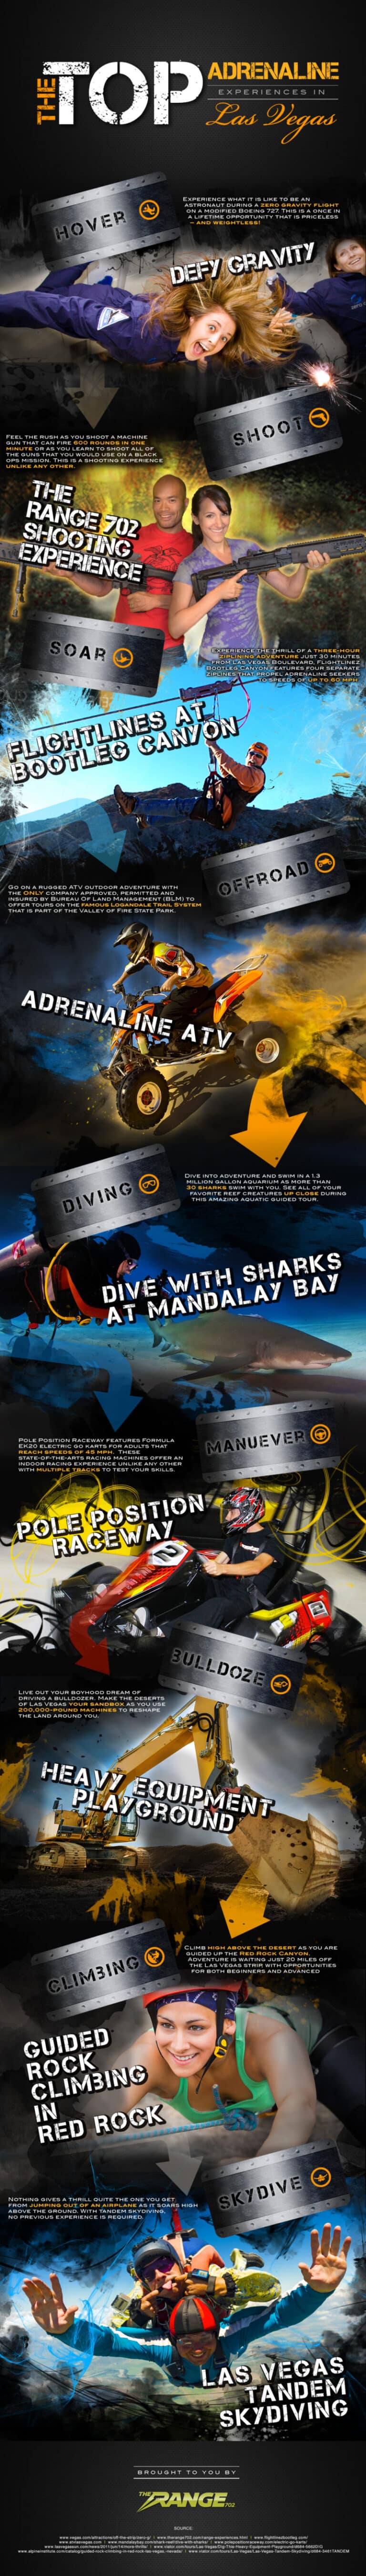 [Infographic] the Top Adrenaline Experiences in Las Vegas